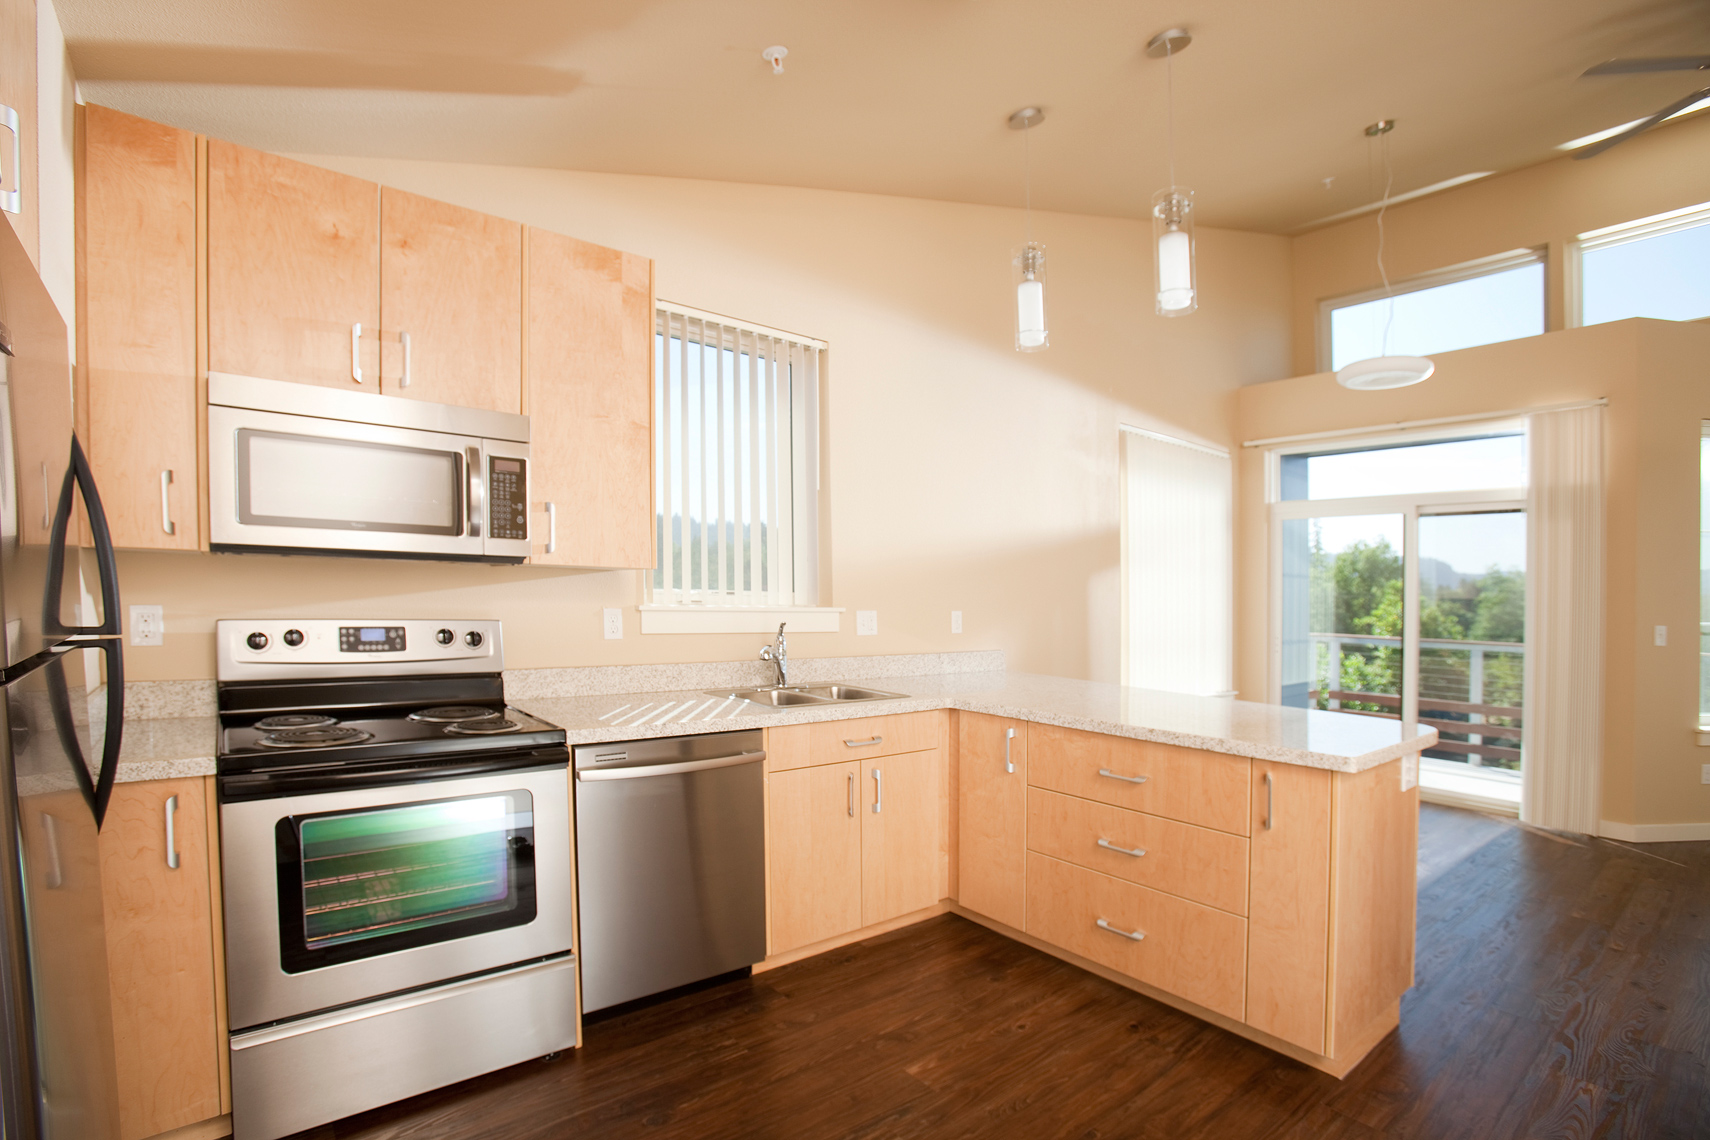 INDPLACE_MULTIFAMILY_KITCHEN_SMALL2